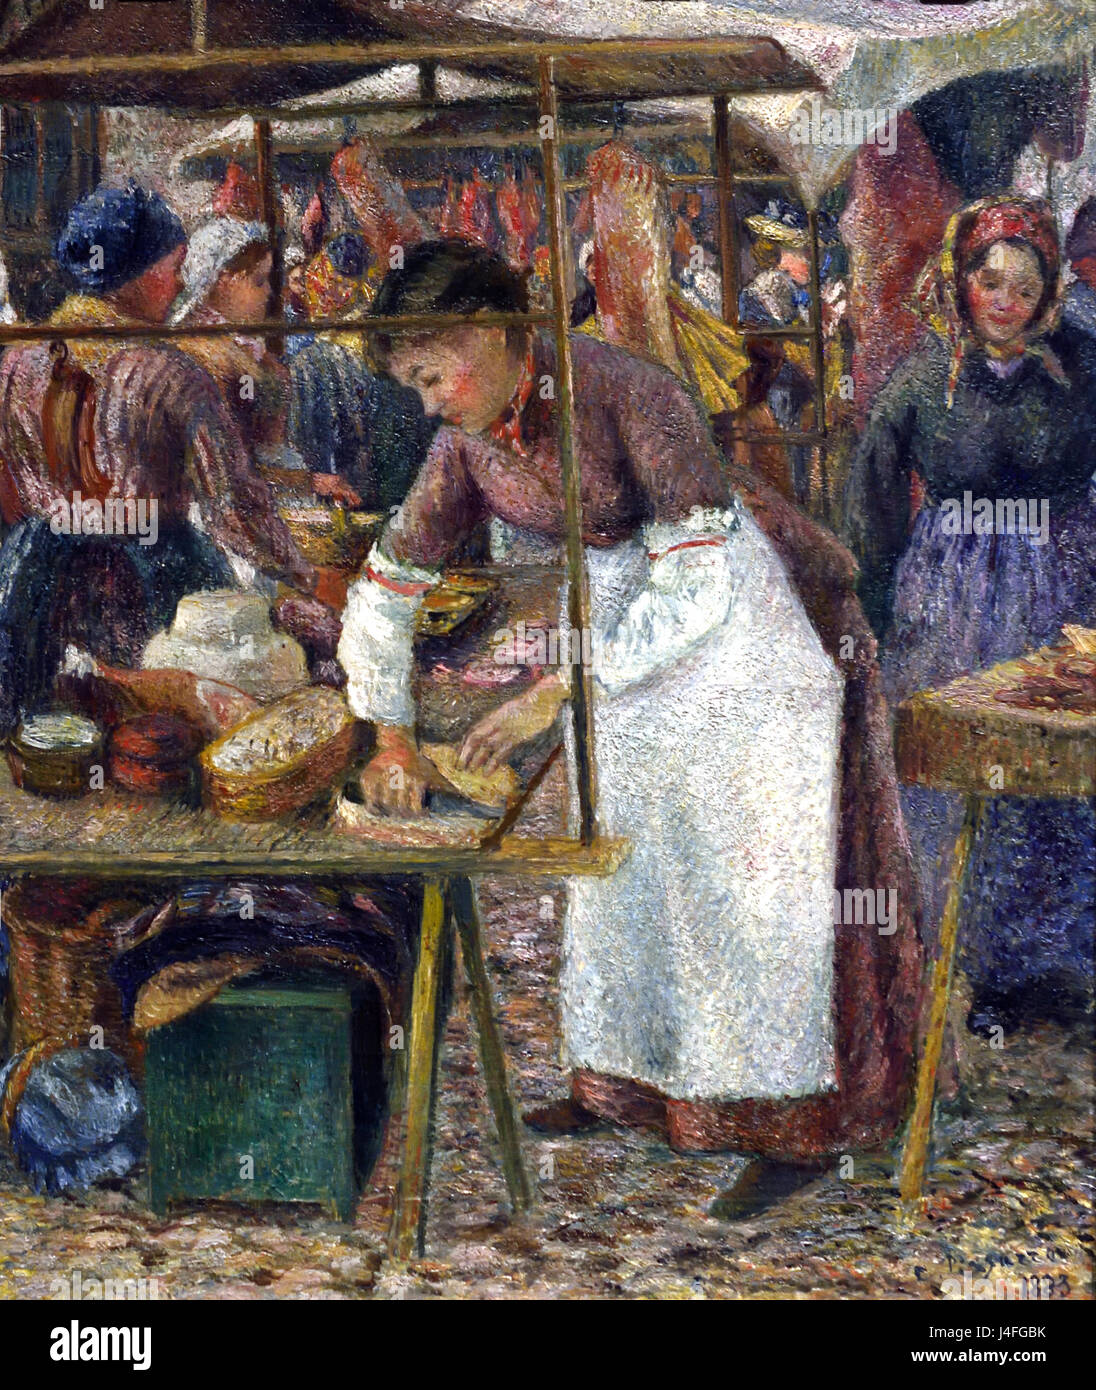 The Pork Butcher 1883 by Camille Pissarro 1830 - 1905 France French Stock Photo